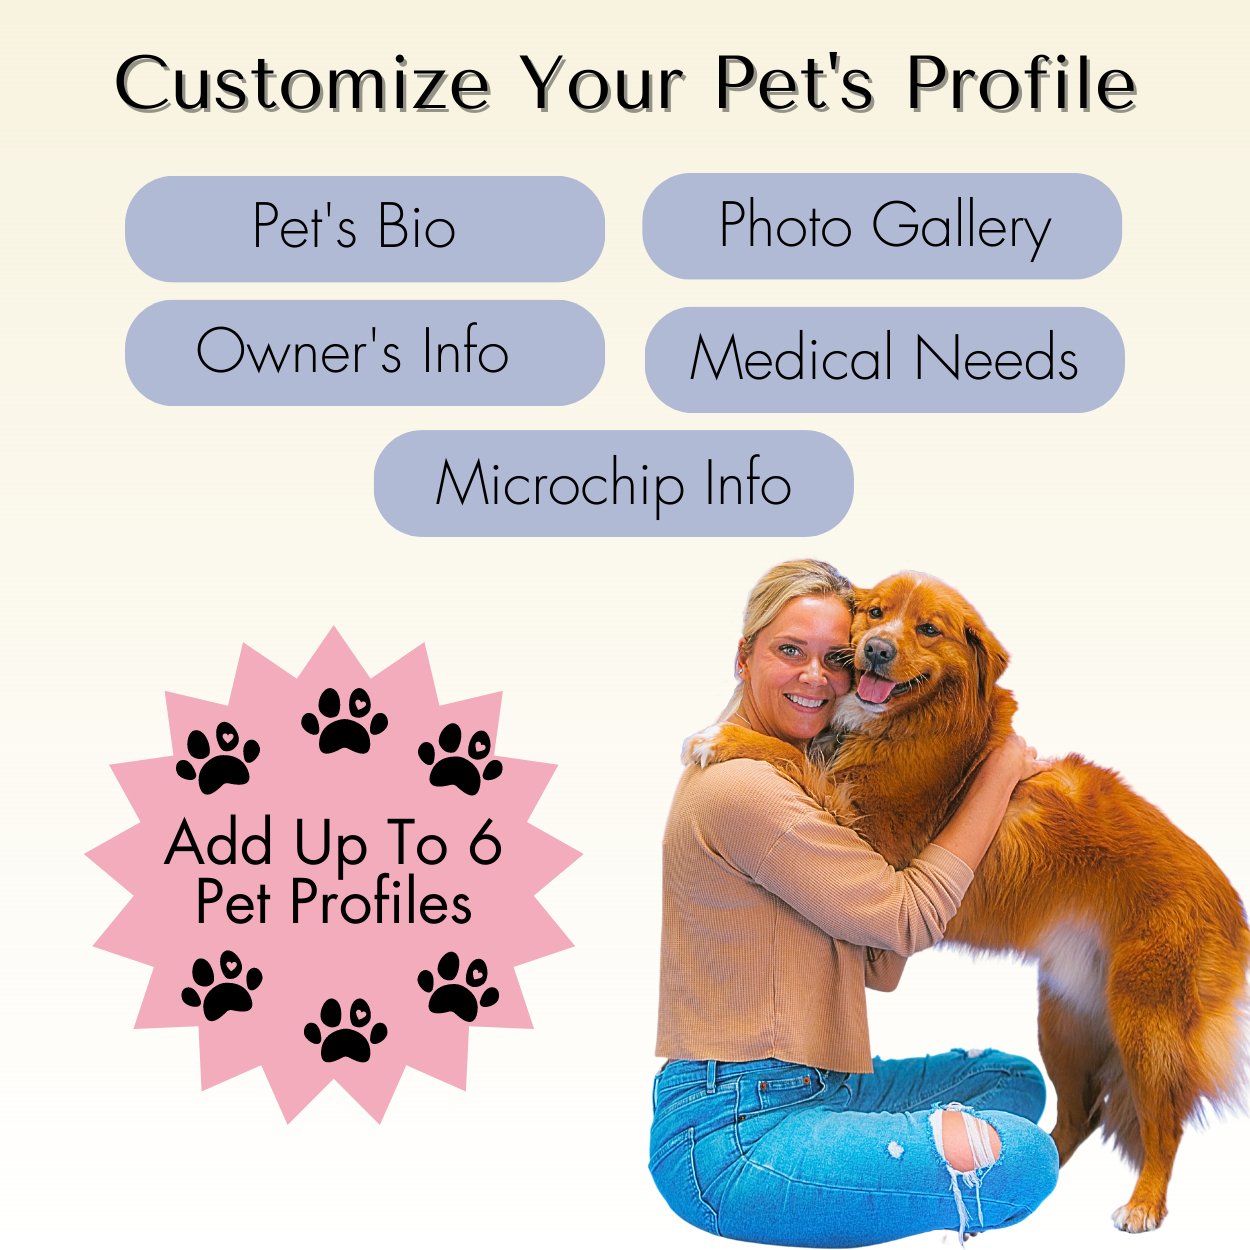 QR Tag - Personalized QR Code Dog Tag Ensure Your Pet's Safety Always (Rose Gold, Willow)